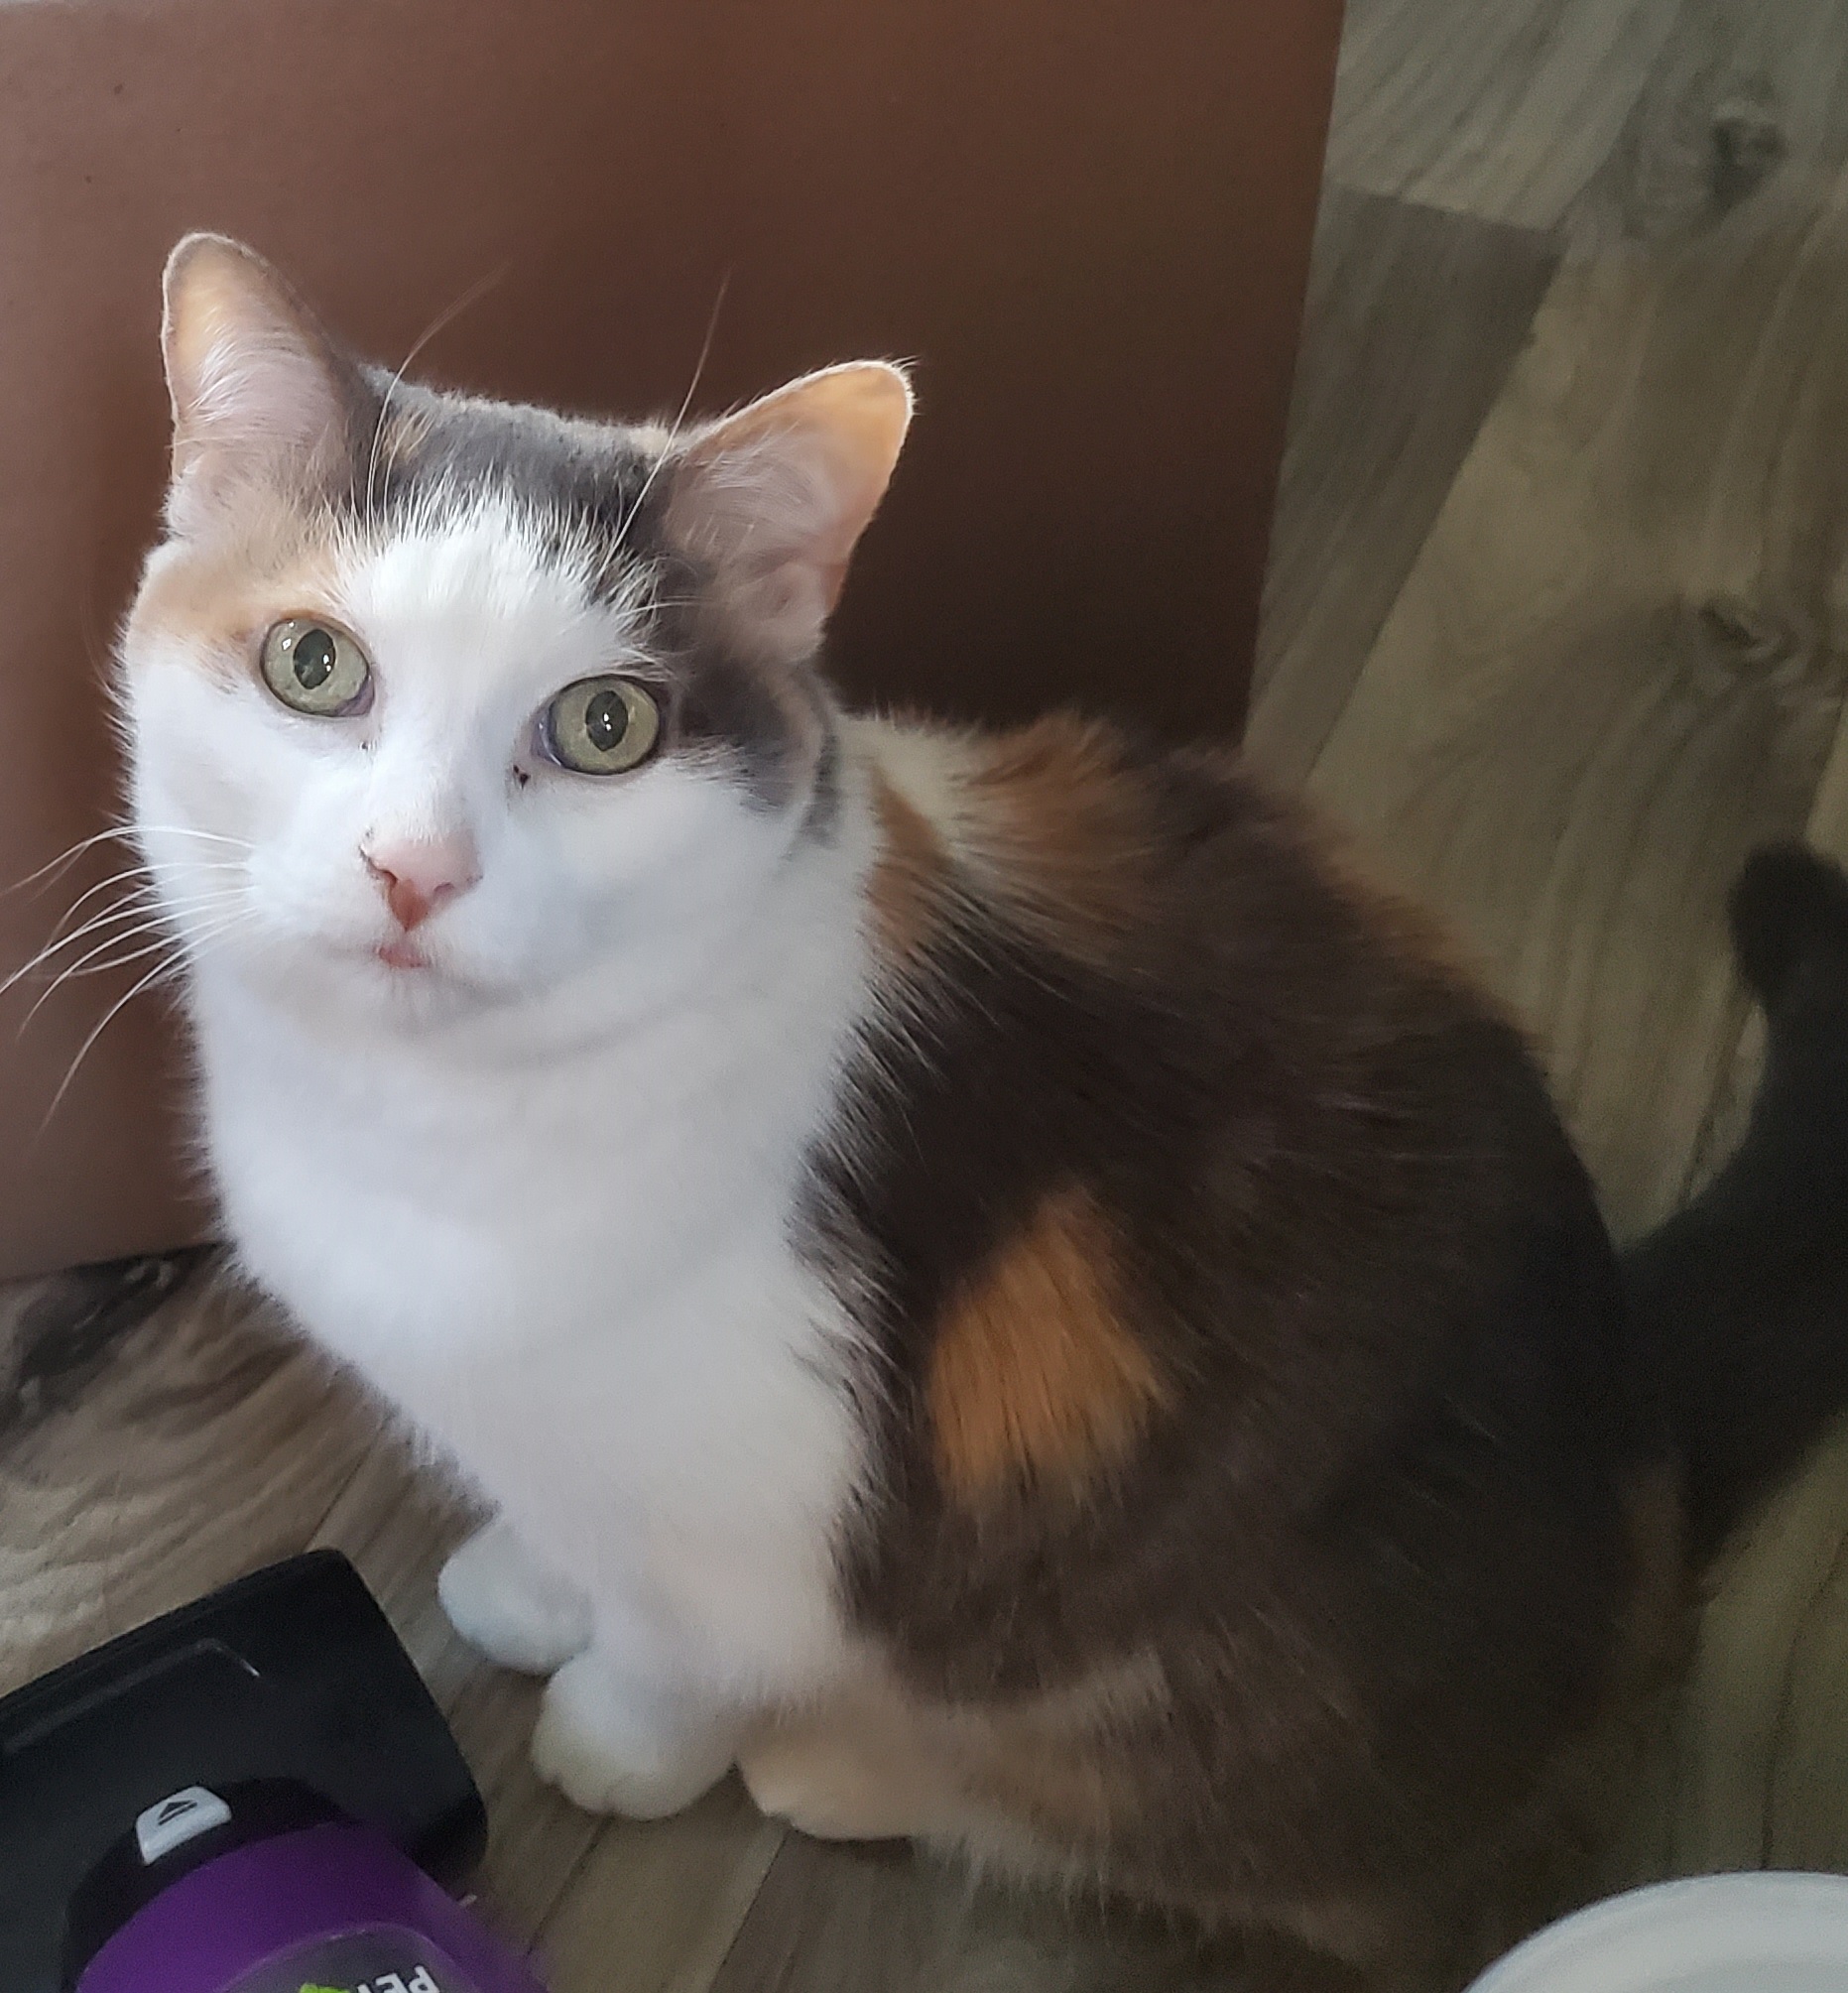 Twinkle the dilute calico cat looks out at you